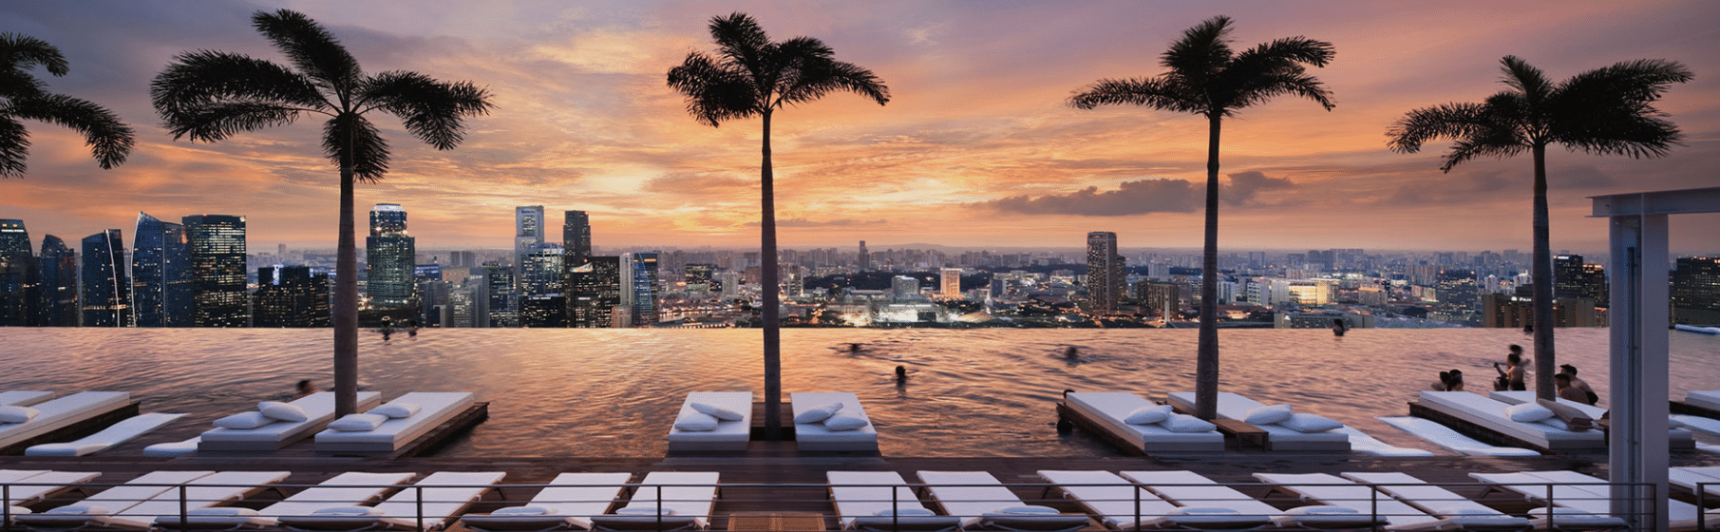 Infinity pool at sunset with palm trees in Singapore